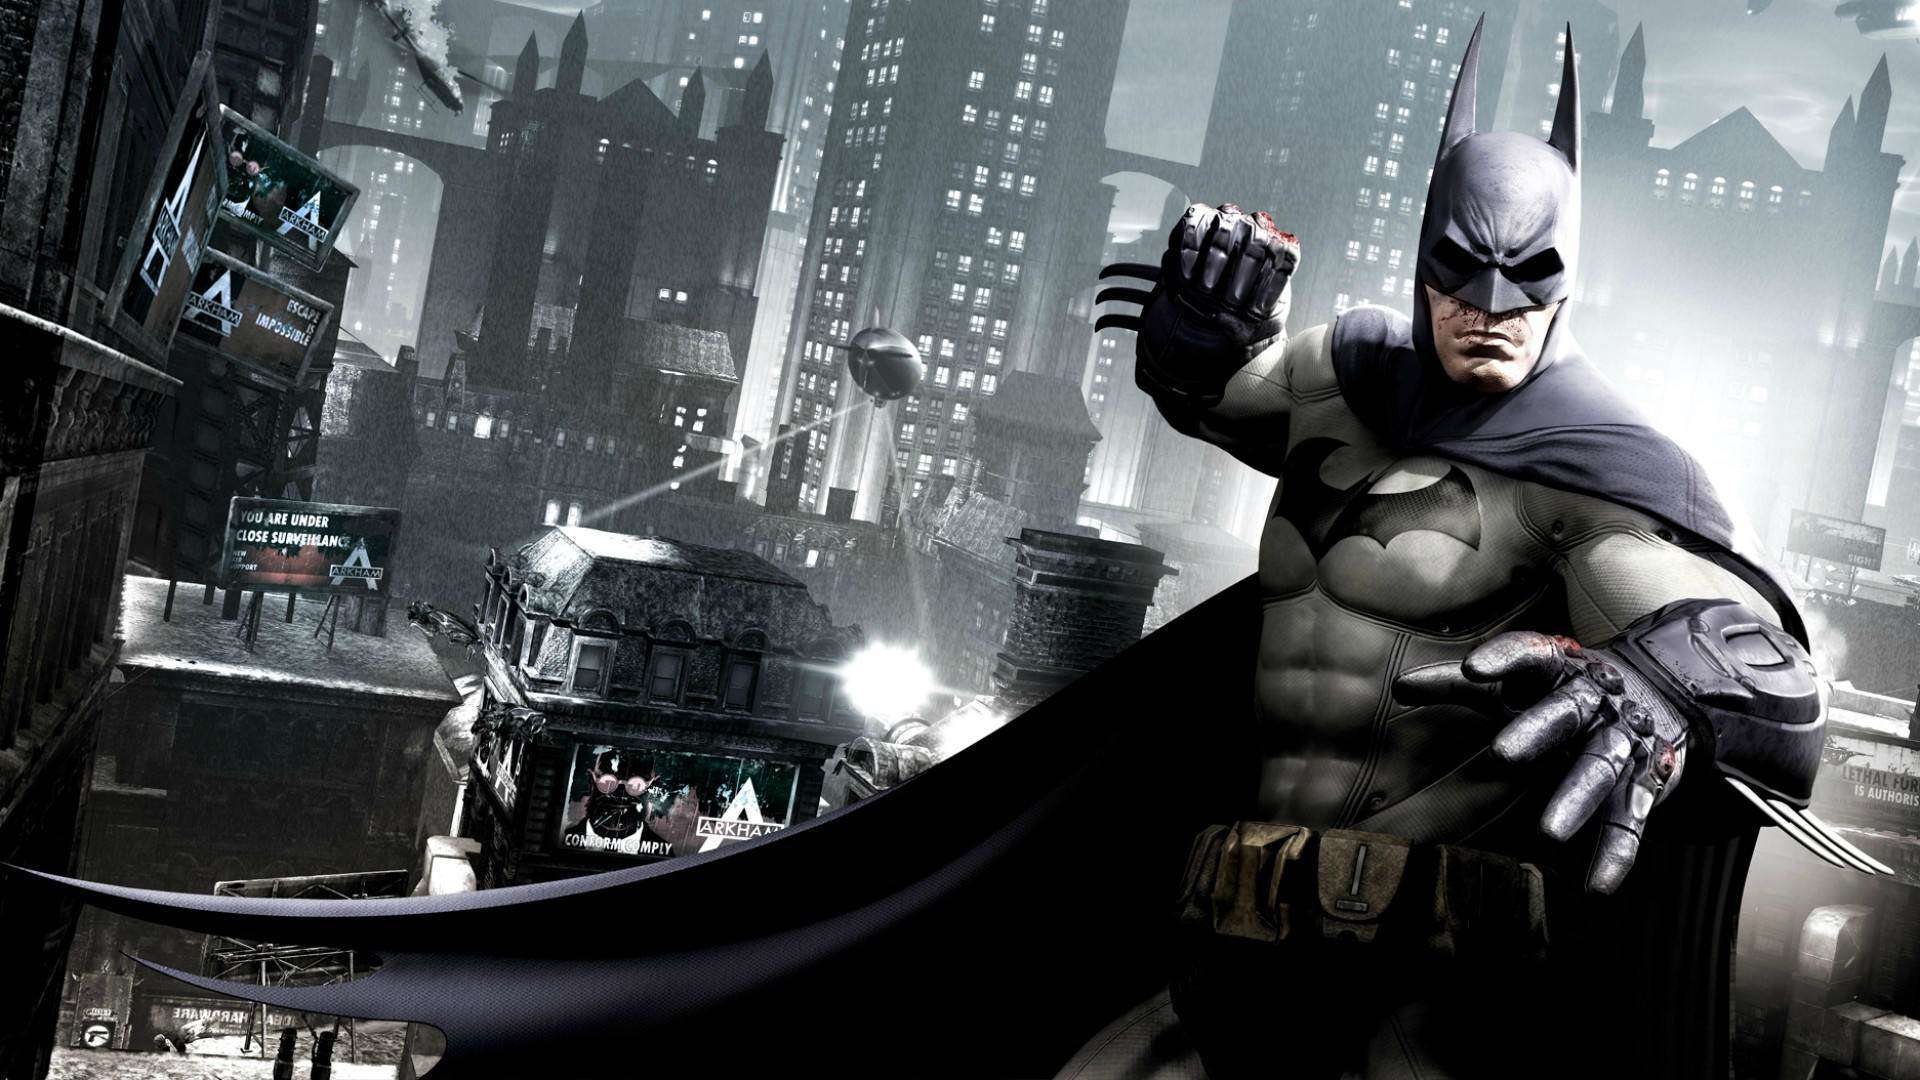 PlayStation 3 exclusive content for Batman: AO Gets a trailer